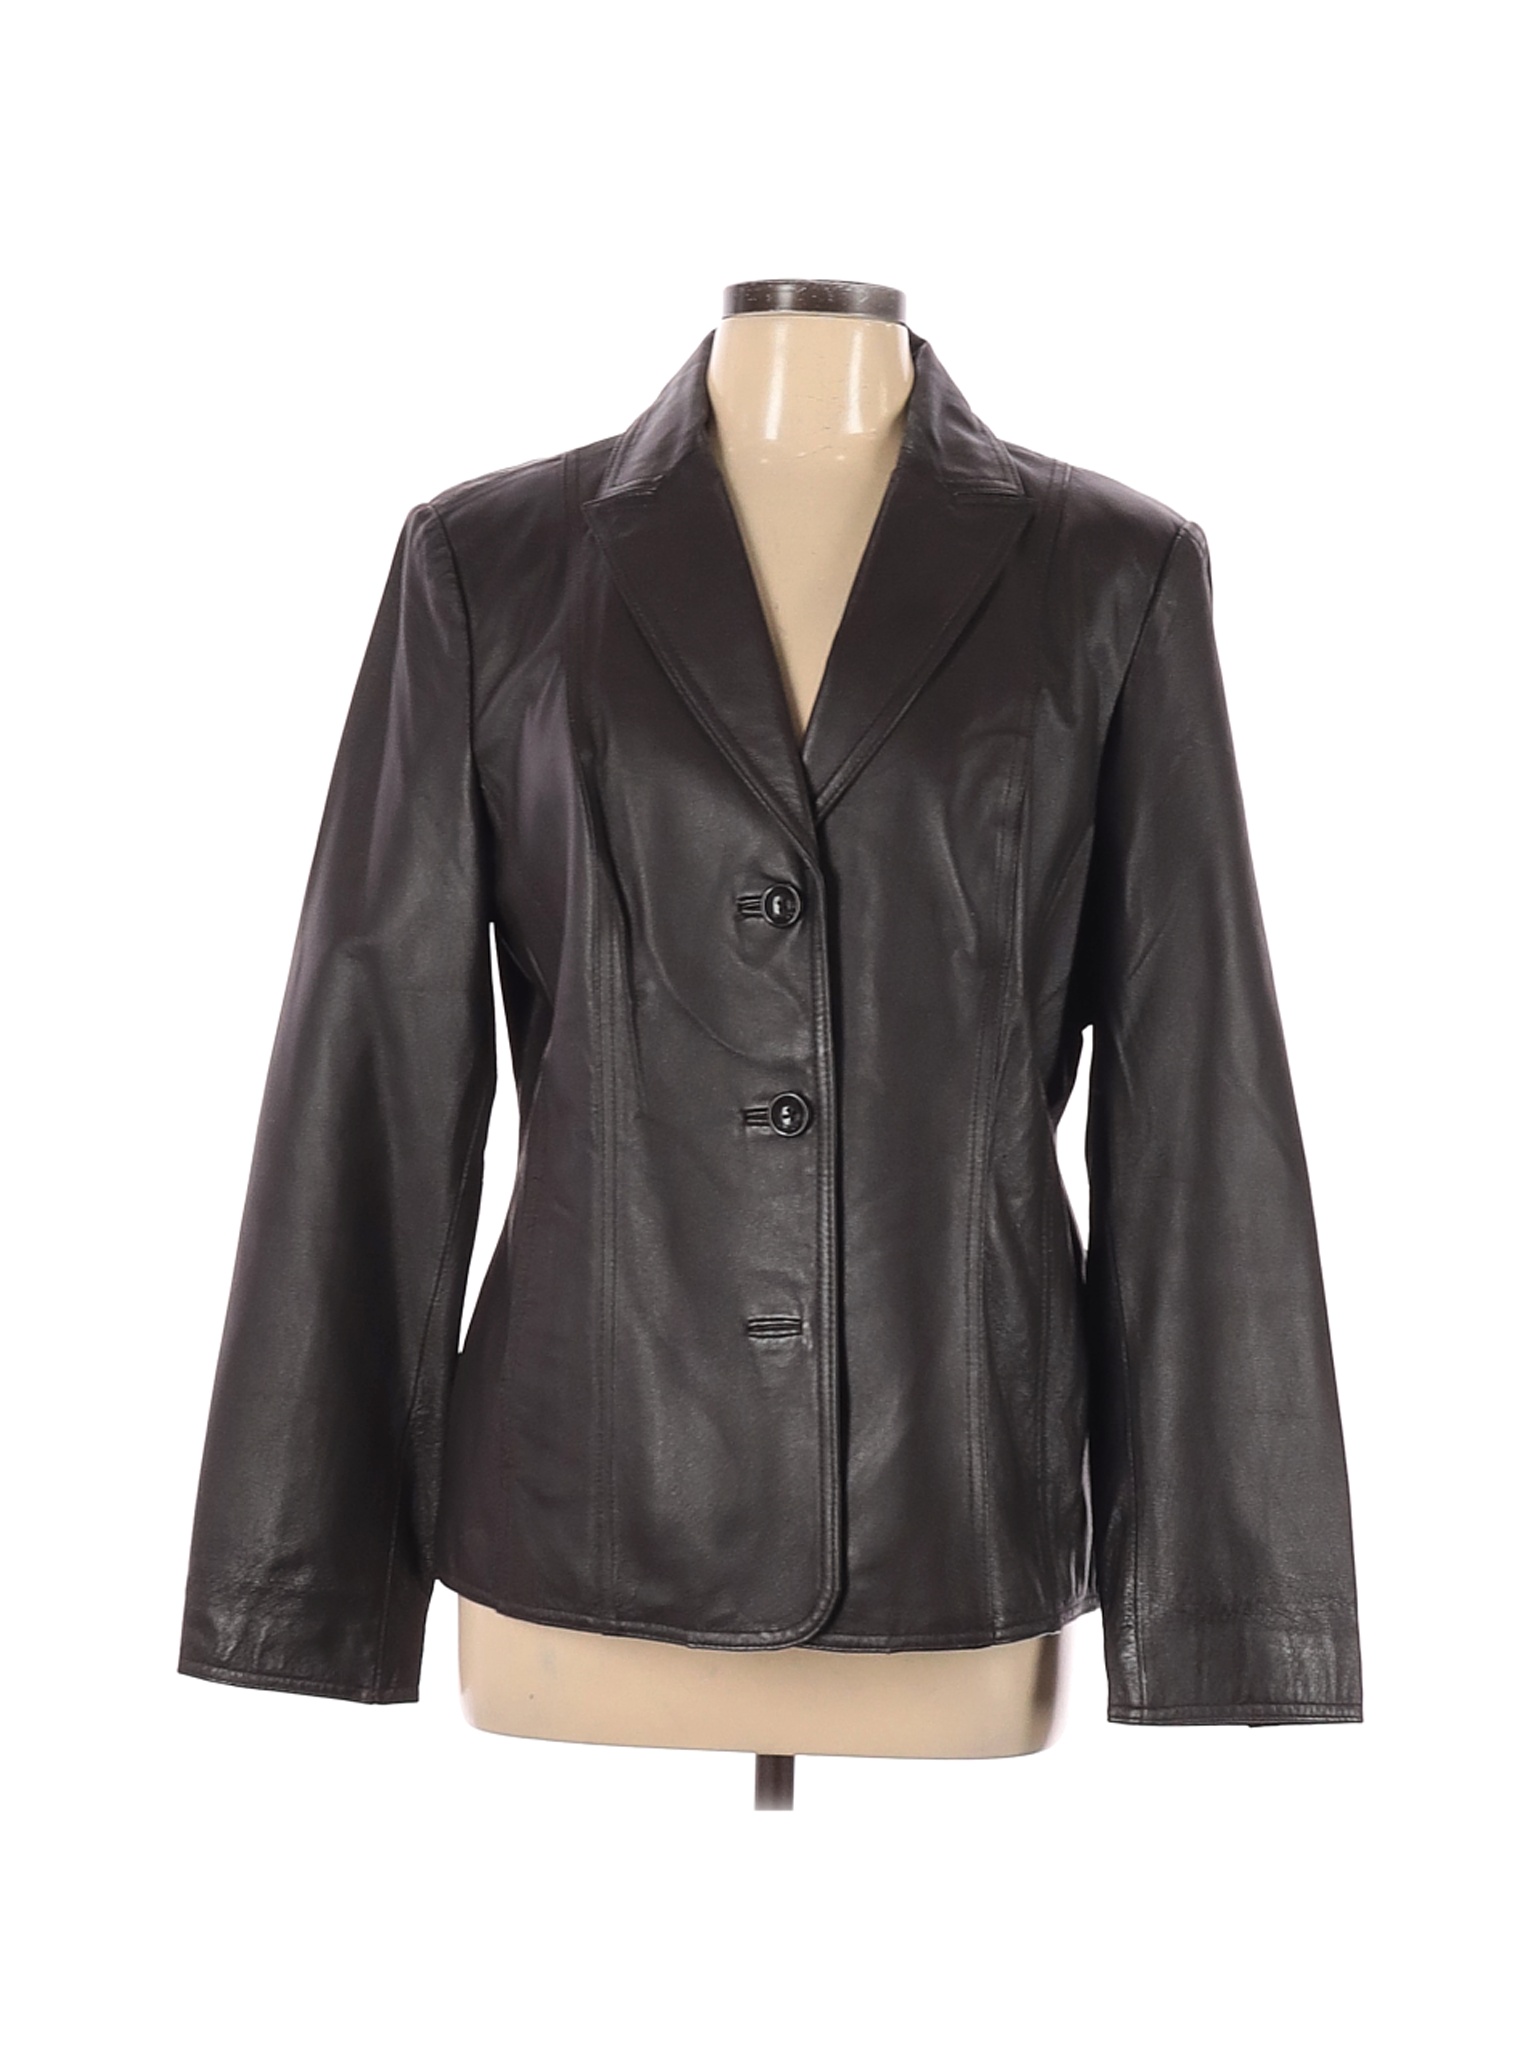 East 5th 100% Polyester Solid Black Faux Leather Jacket Size L - 61%